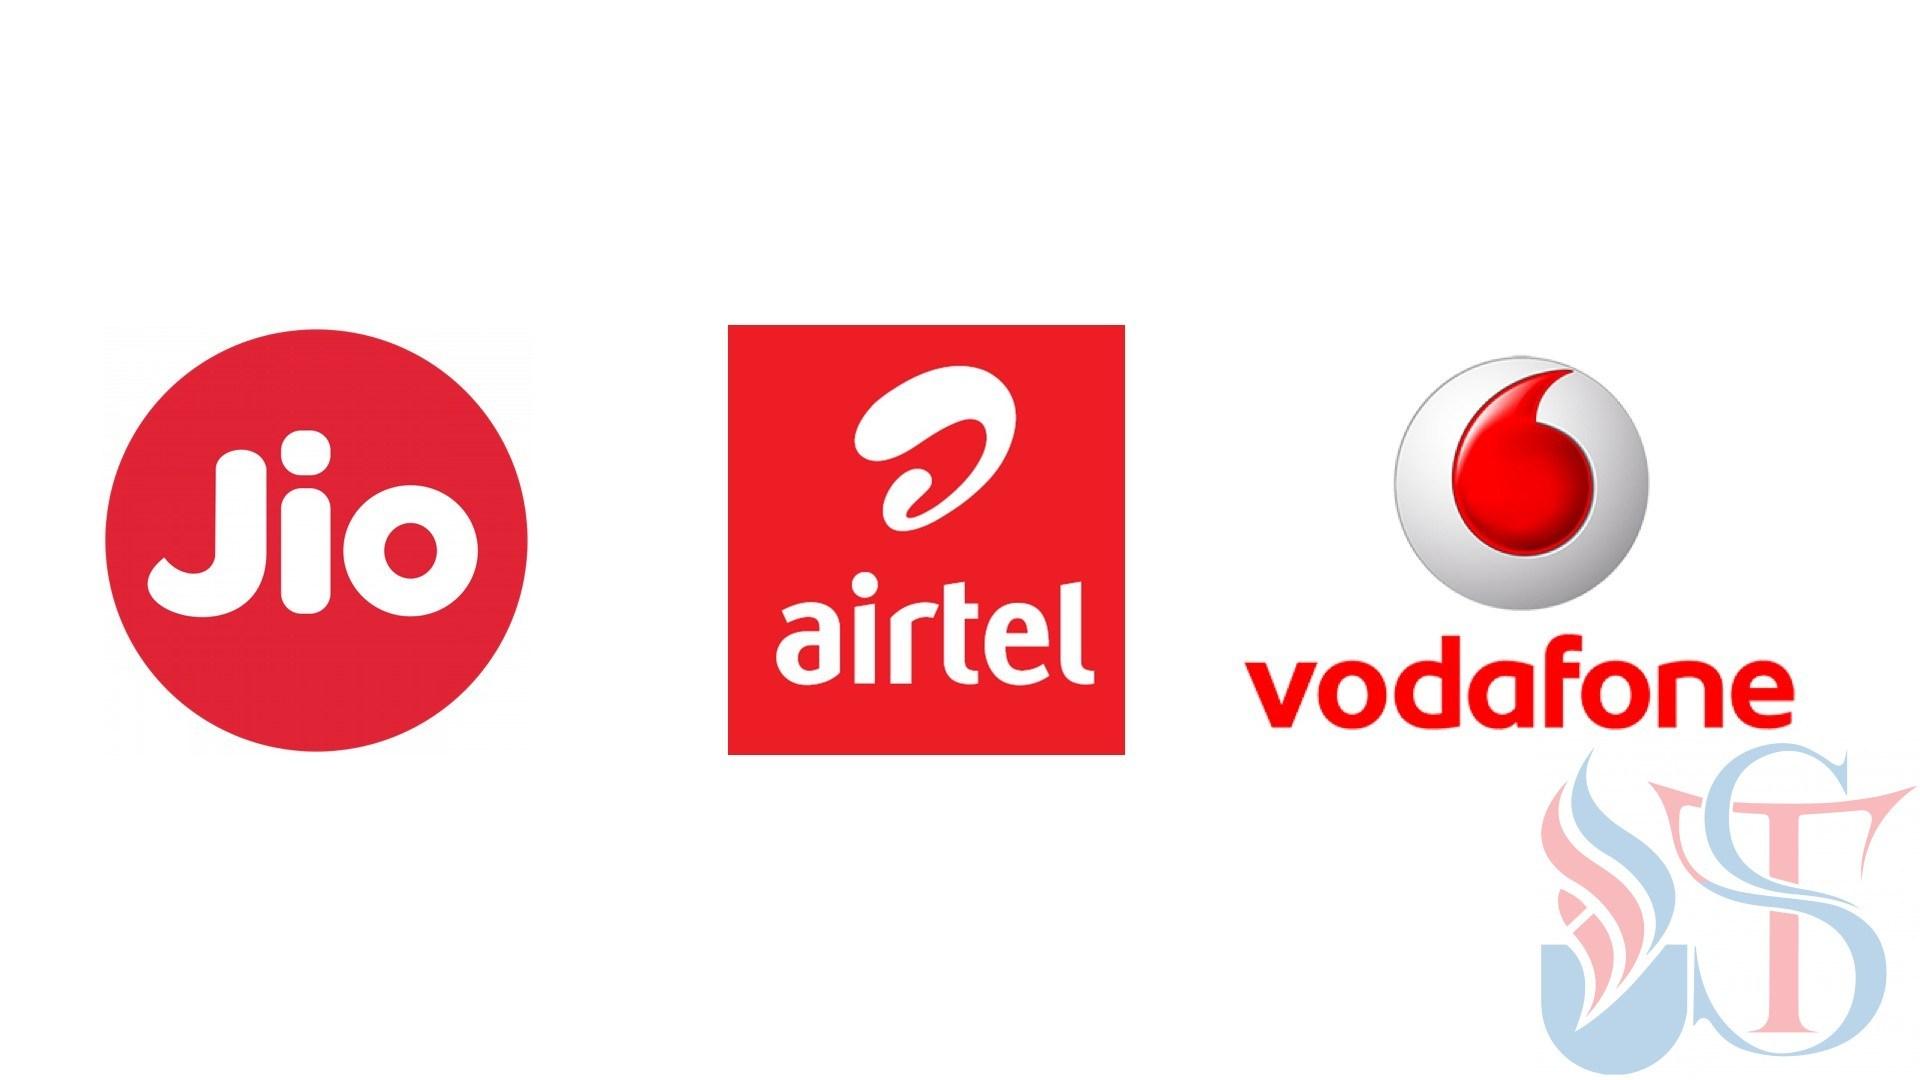 Bharti Airtel and Vodafone Idea to introduce new prepaid recharge